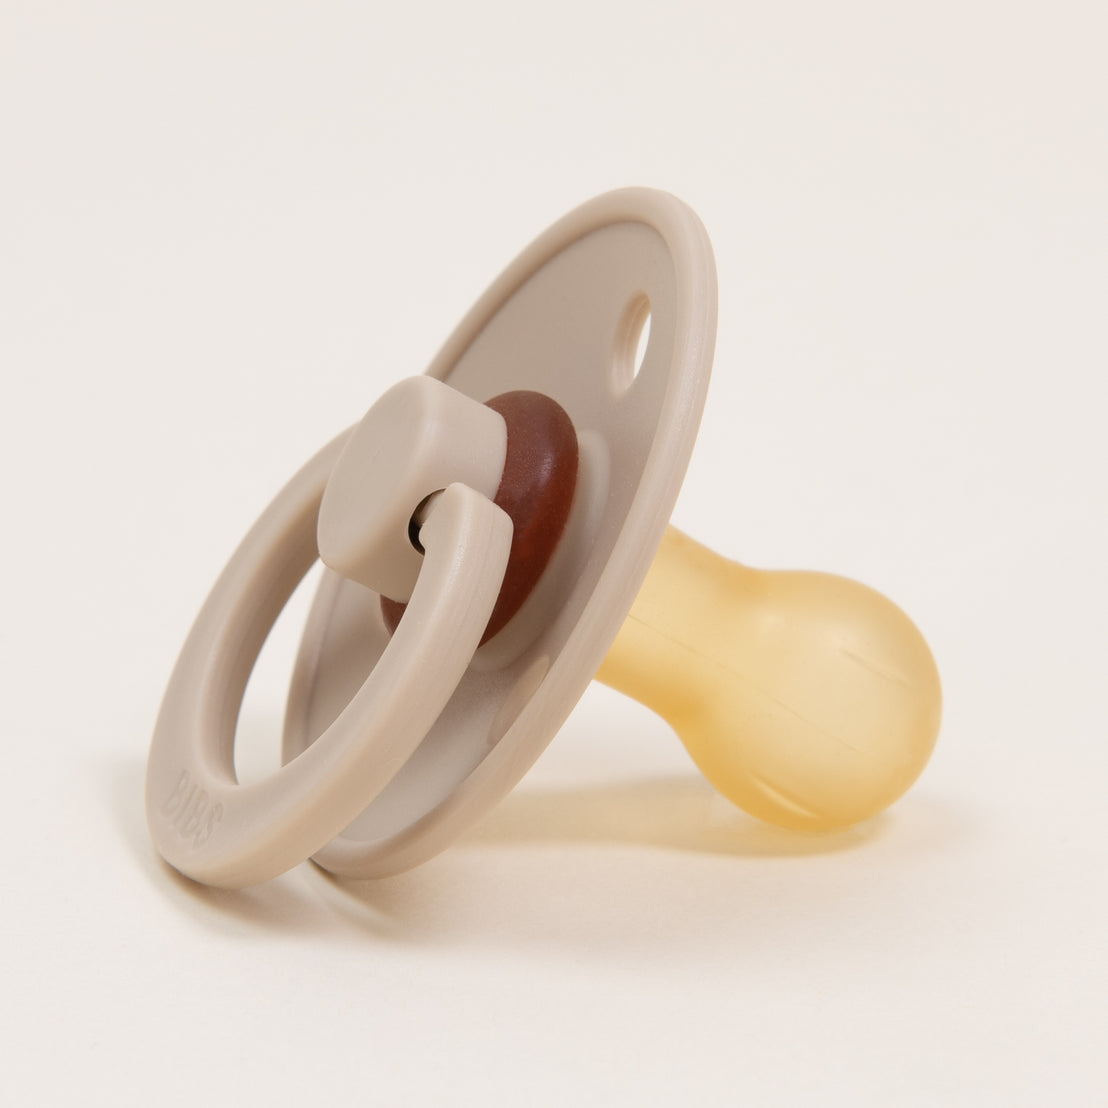 A close-up image of a Bibs Pacifier in "vanilla" on a white background, featuring classic design with three circular holes around the shield.